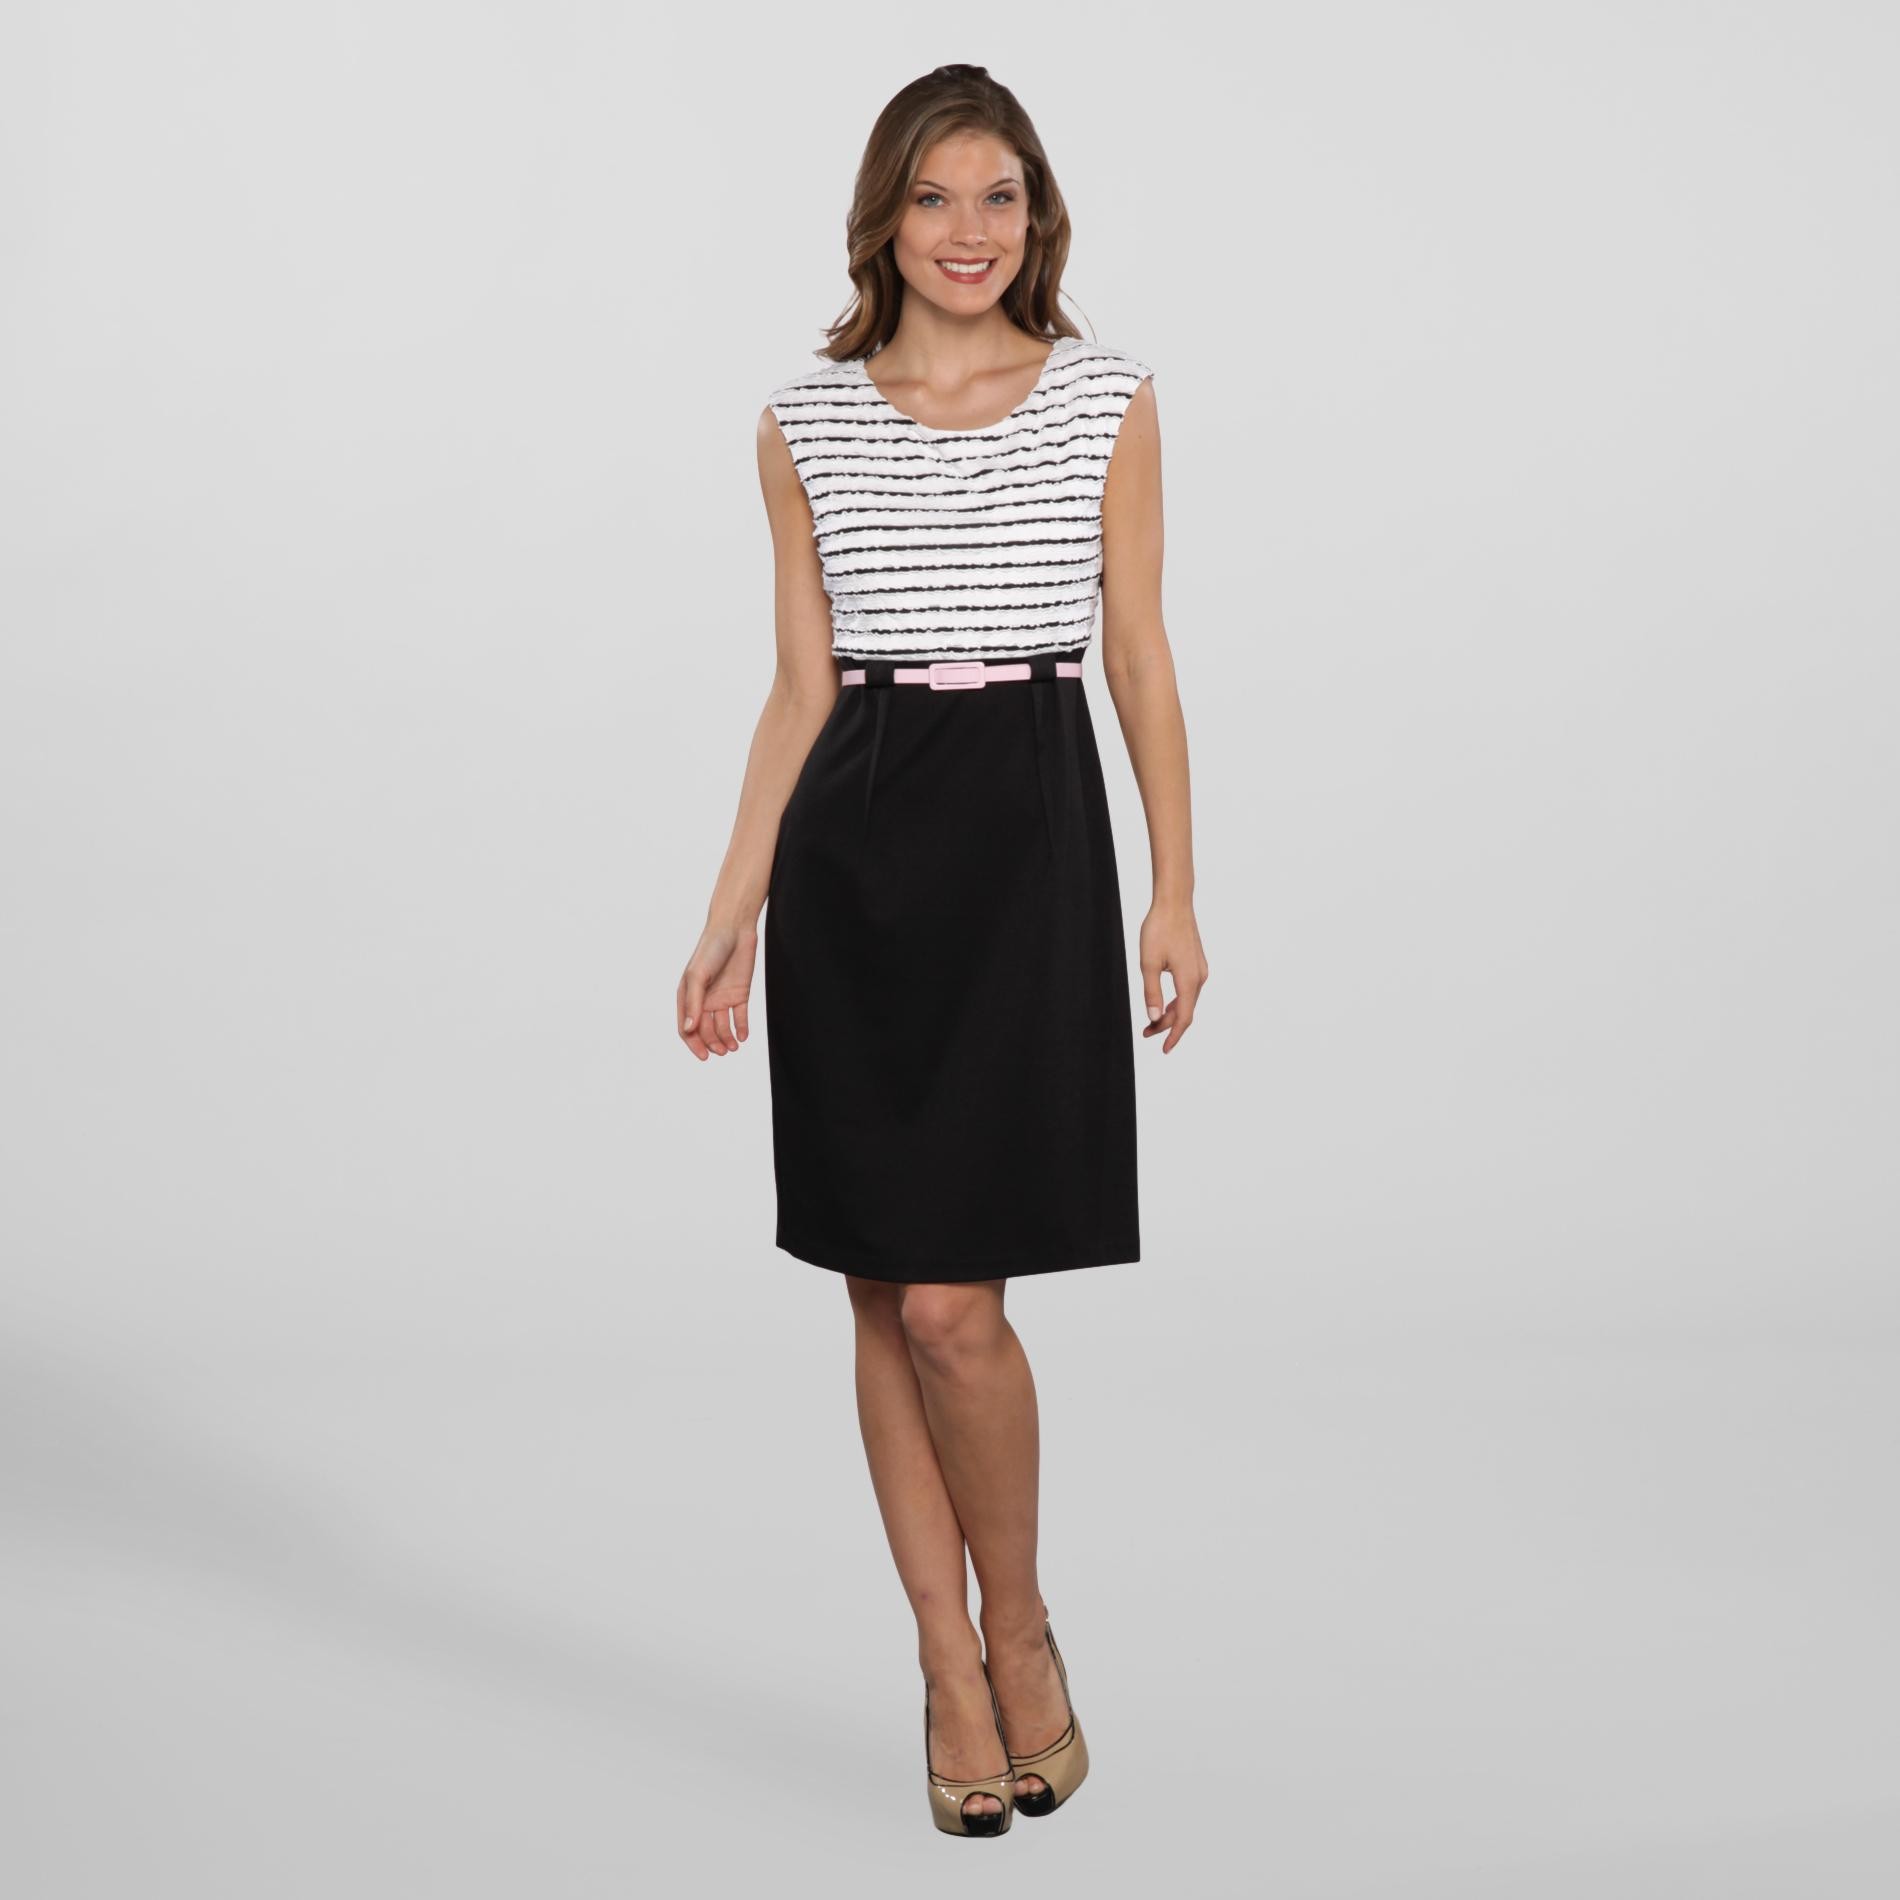 Connected Apparel Women's Party Dress & Belt White/Black/Pink 16